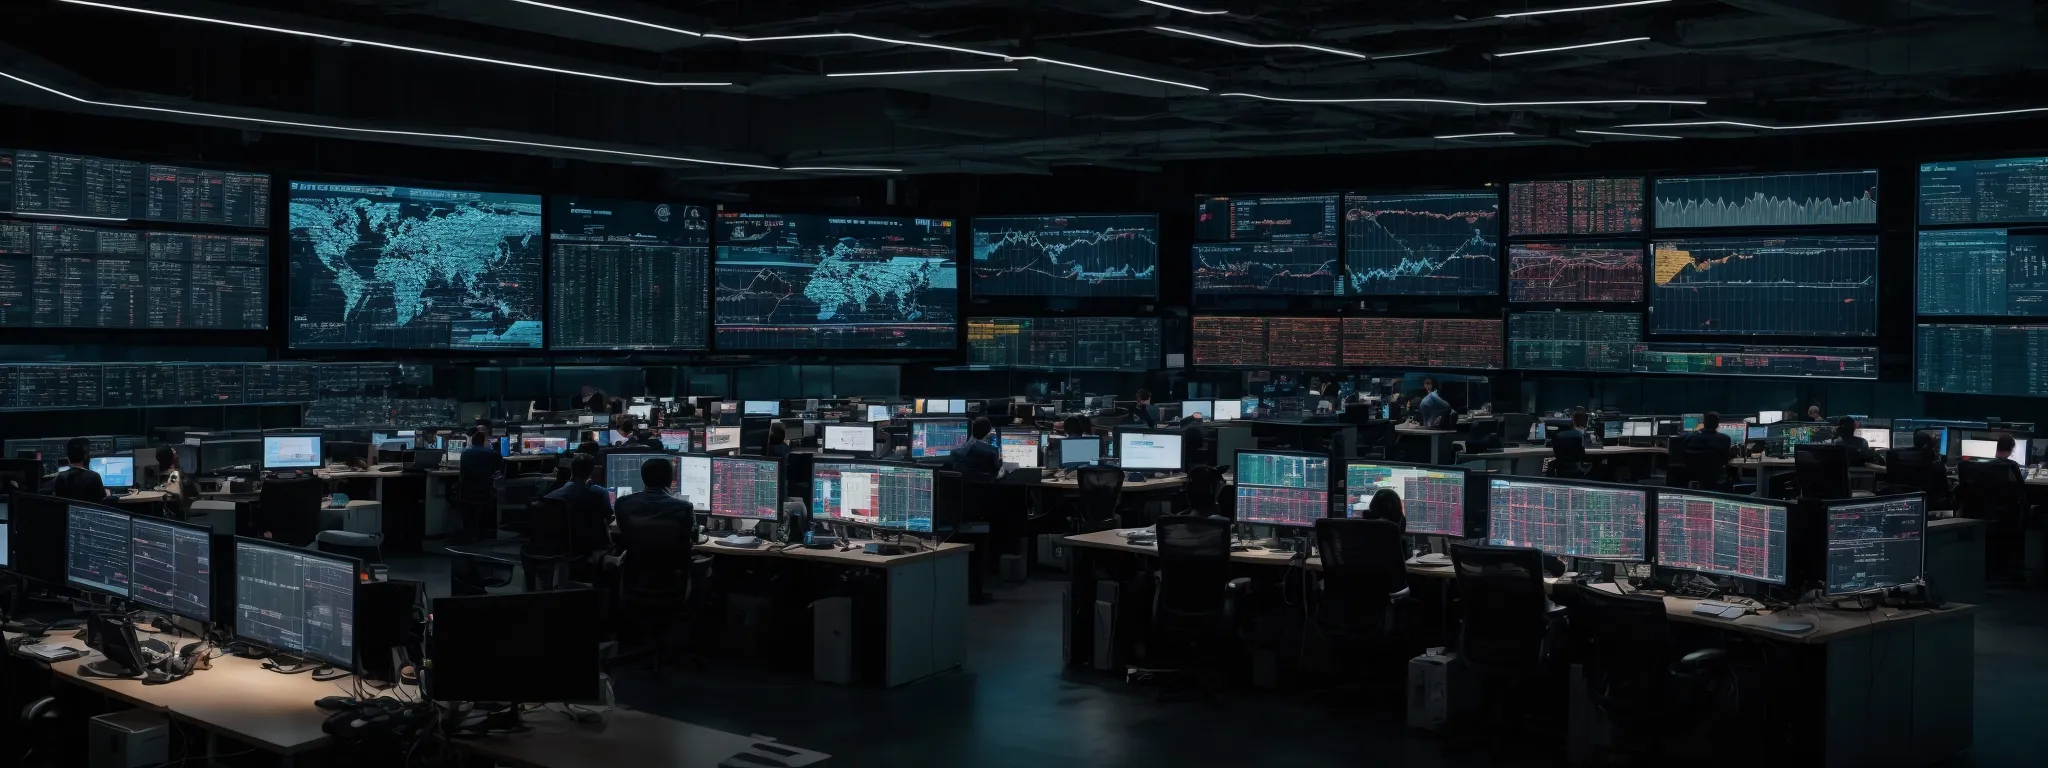 a network operations center with large screens displaying global data traffic patterns and server status reports.